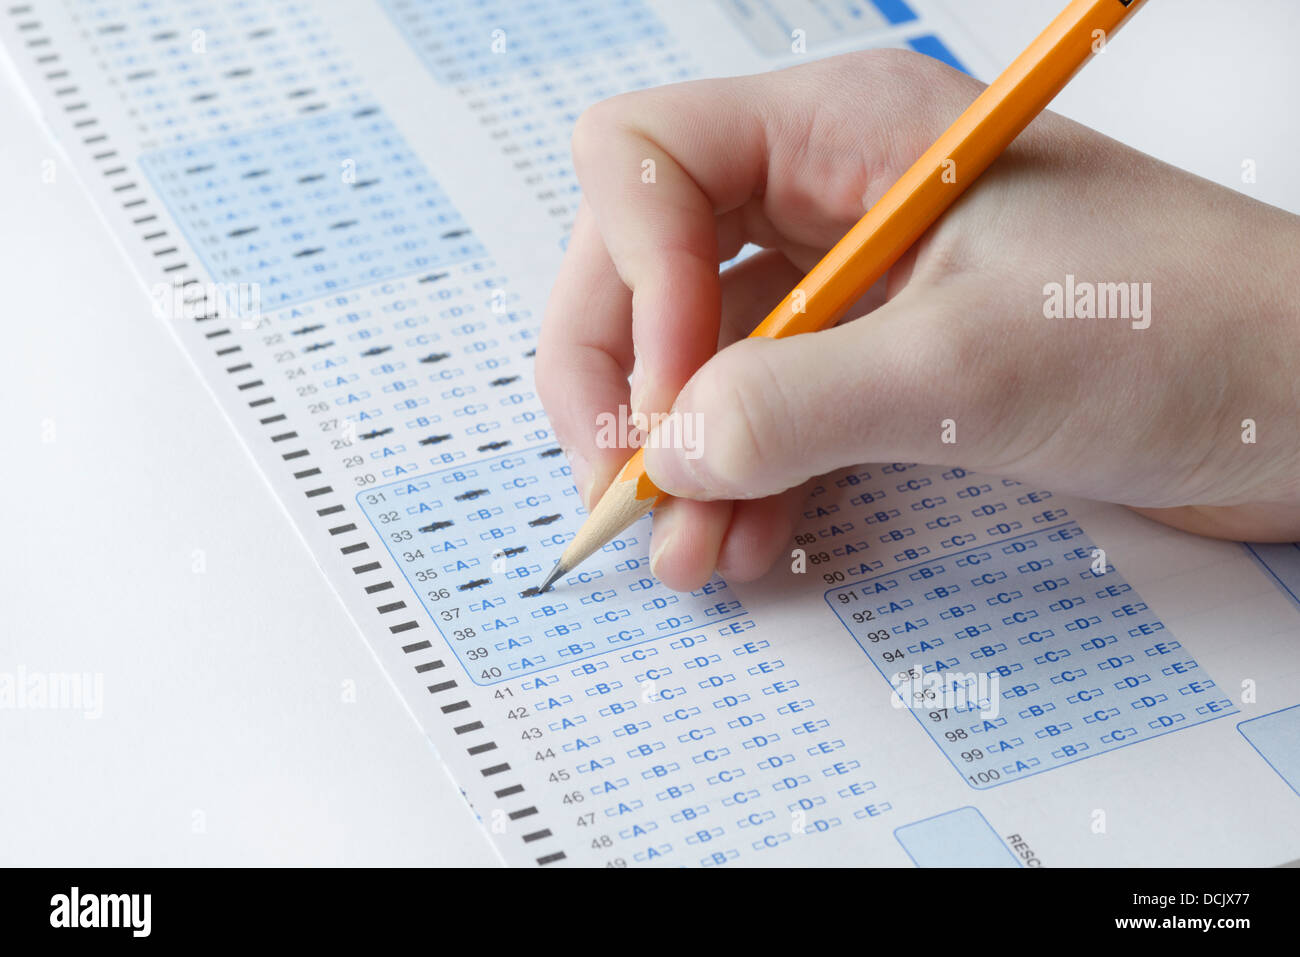 Optical scan answer sheet for a school exam Stock Photo